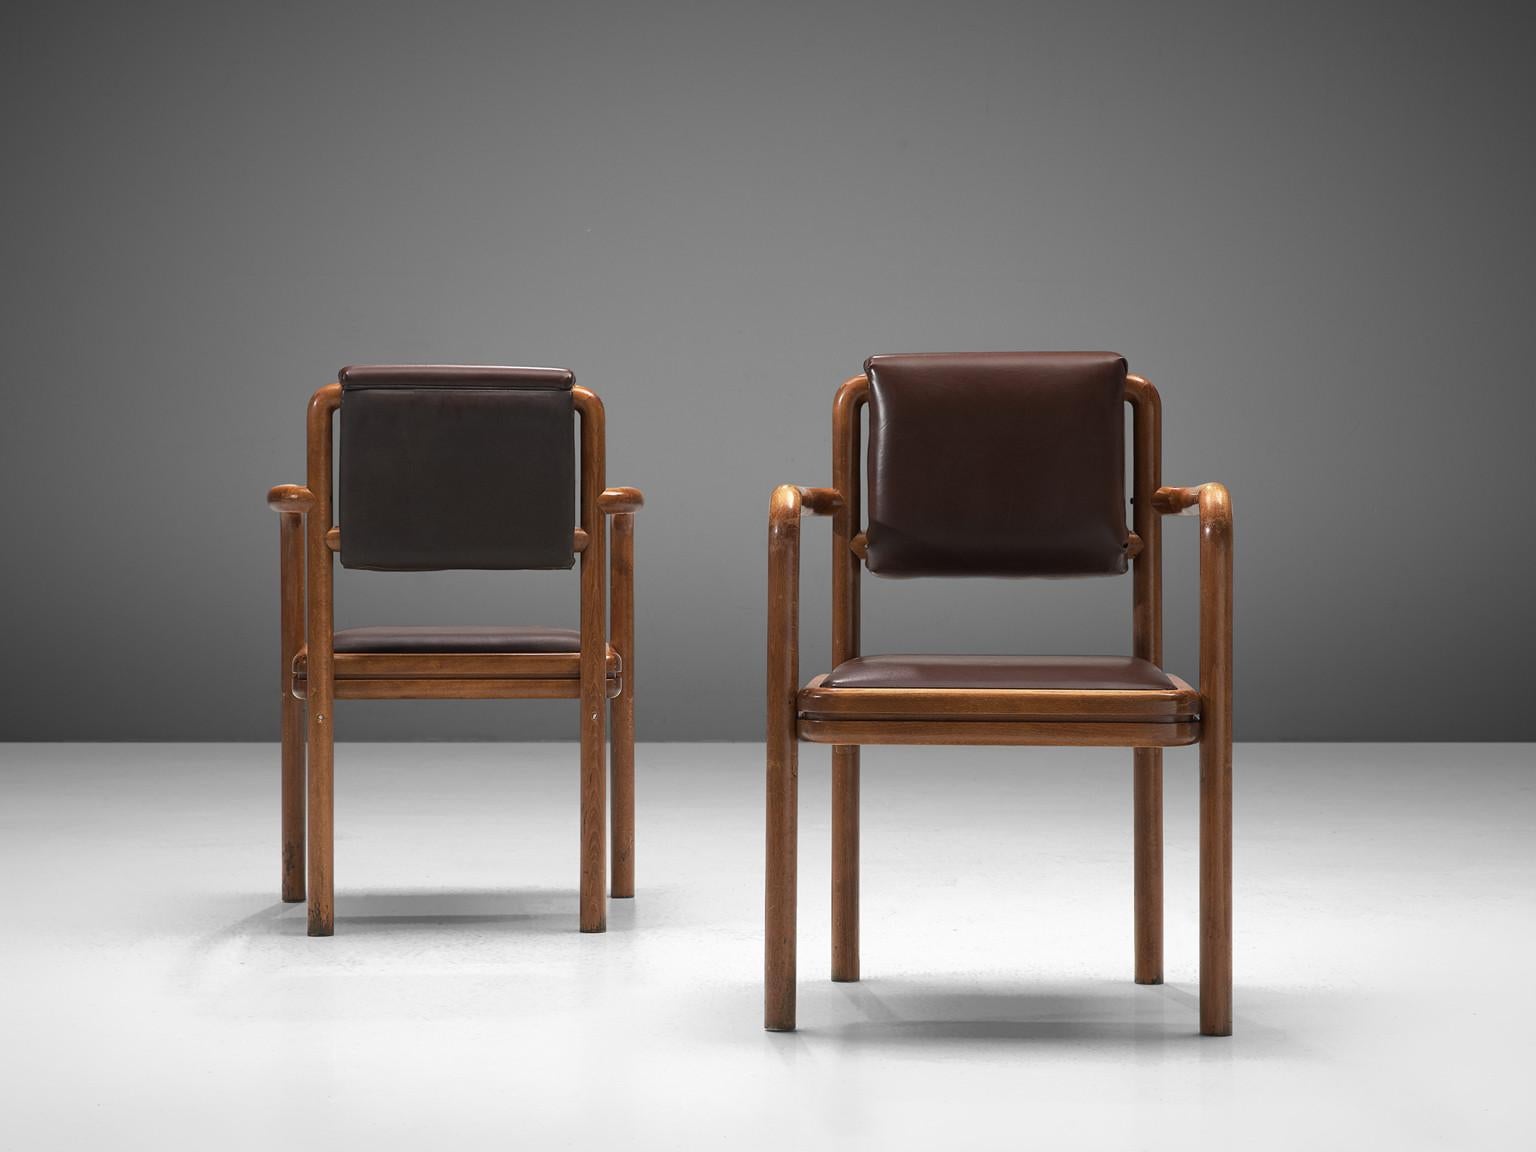 Ton, pair of armchairs, stained beech, leatherette, Czech Republic, 1960s. 

This delightful pair of armchairs is characterized by a bentwood frame featuring elegant round corners and clear lines. The seat and backrest are upholstered in a